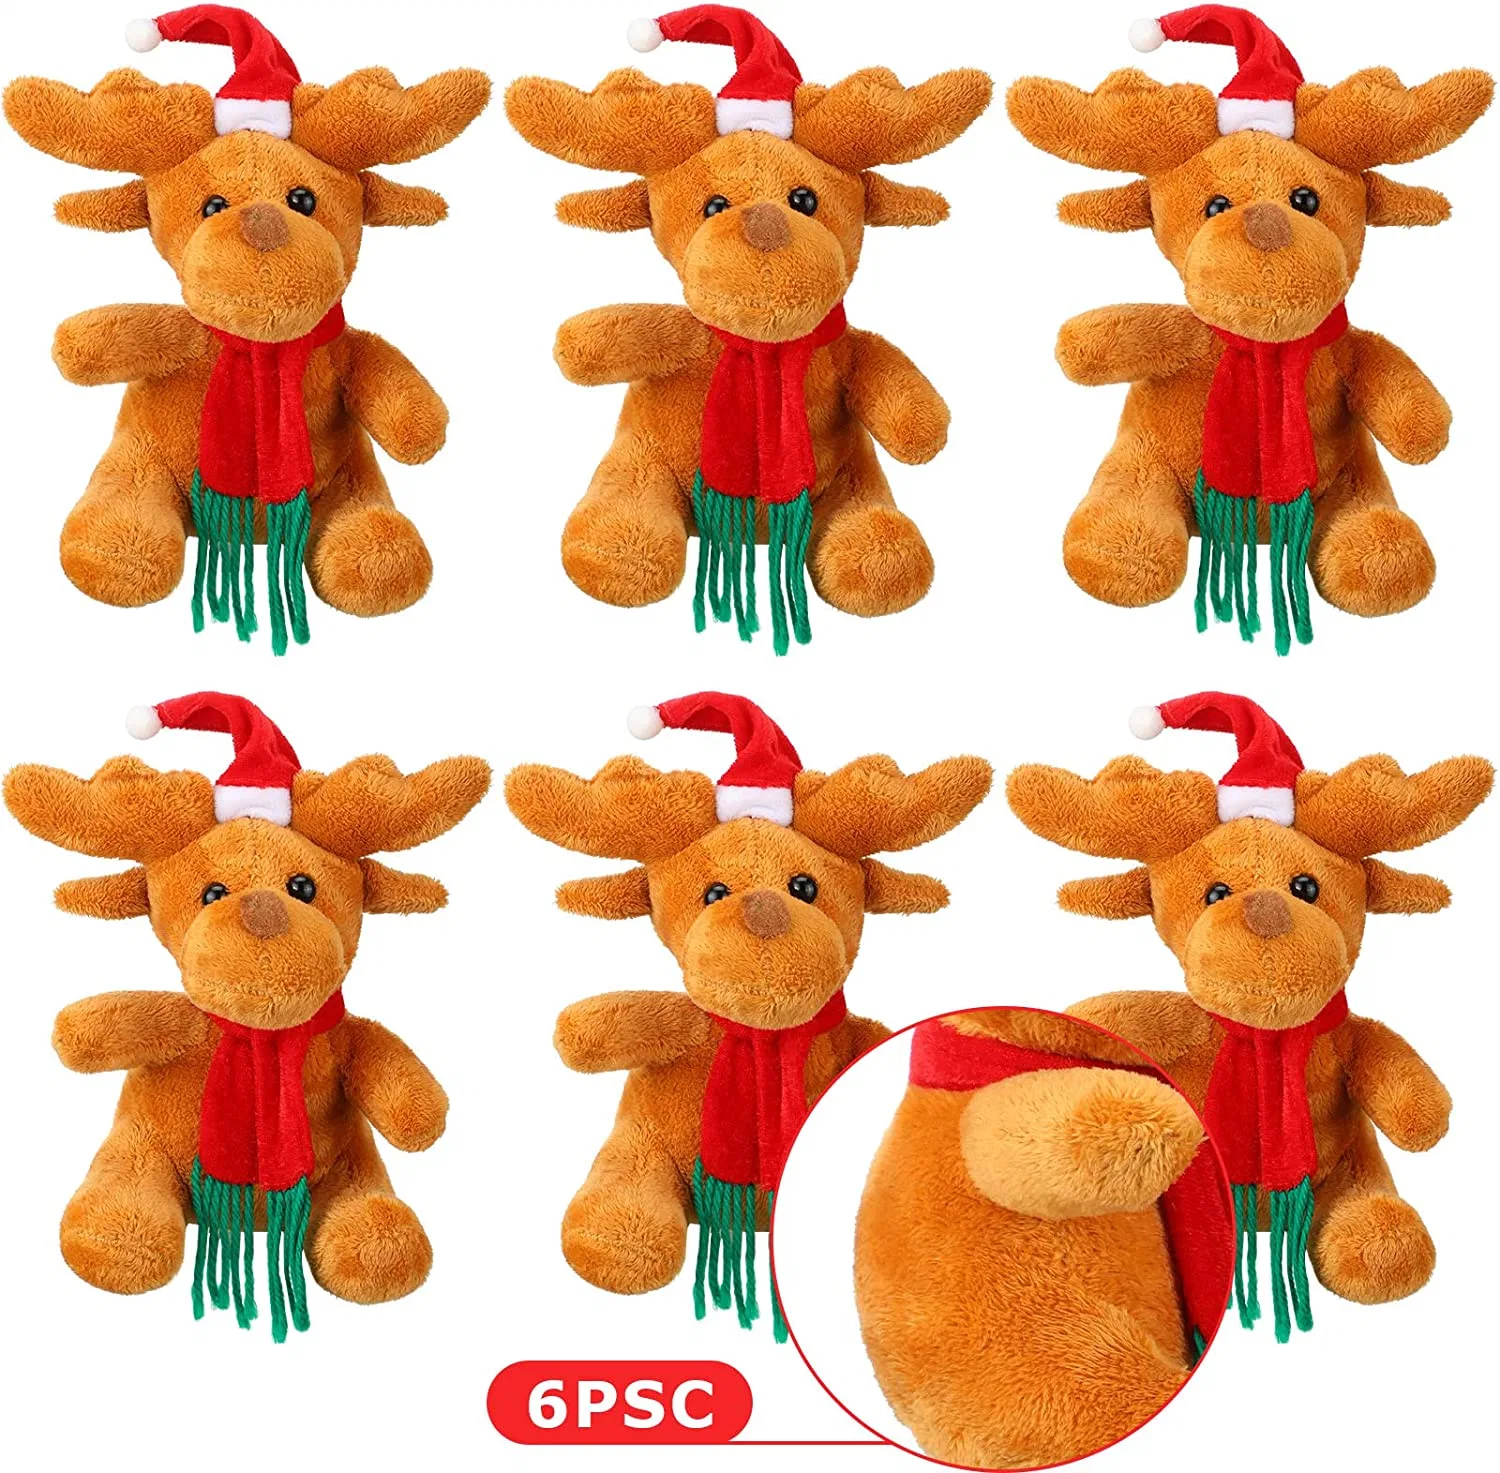 Christmas Festival Promotional Stuffed Soft Plush Soft Reindeer Toy Children Toys OEM ODM Decoration Factory Manufacturer BSCI Sedex ISO9001